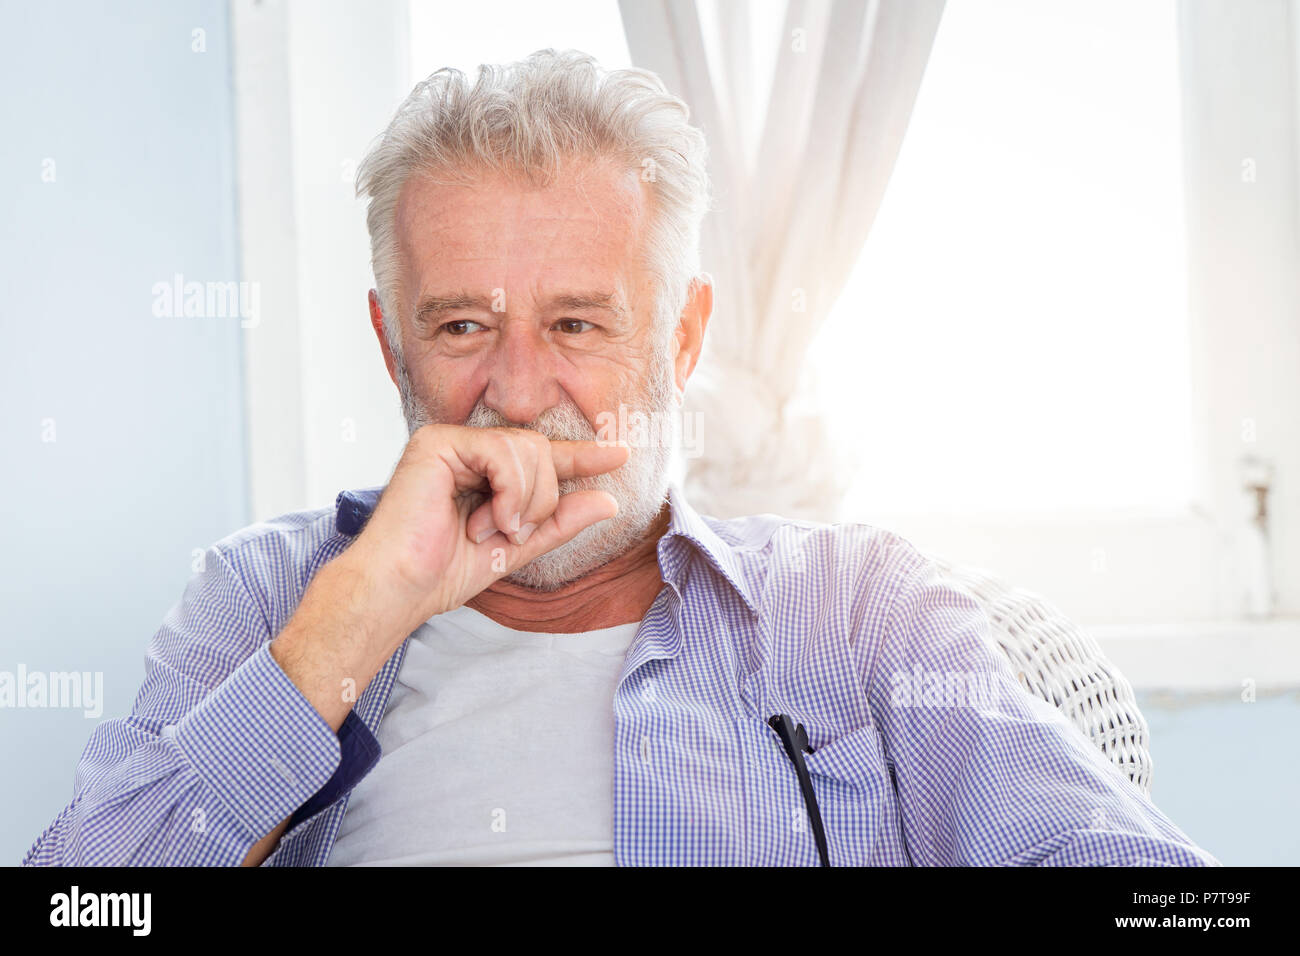 Elderly old man cute hiding smile look shy sitting in room with window. Stock Photo